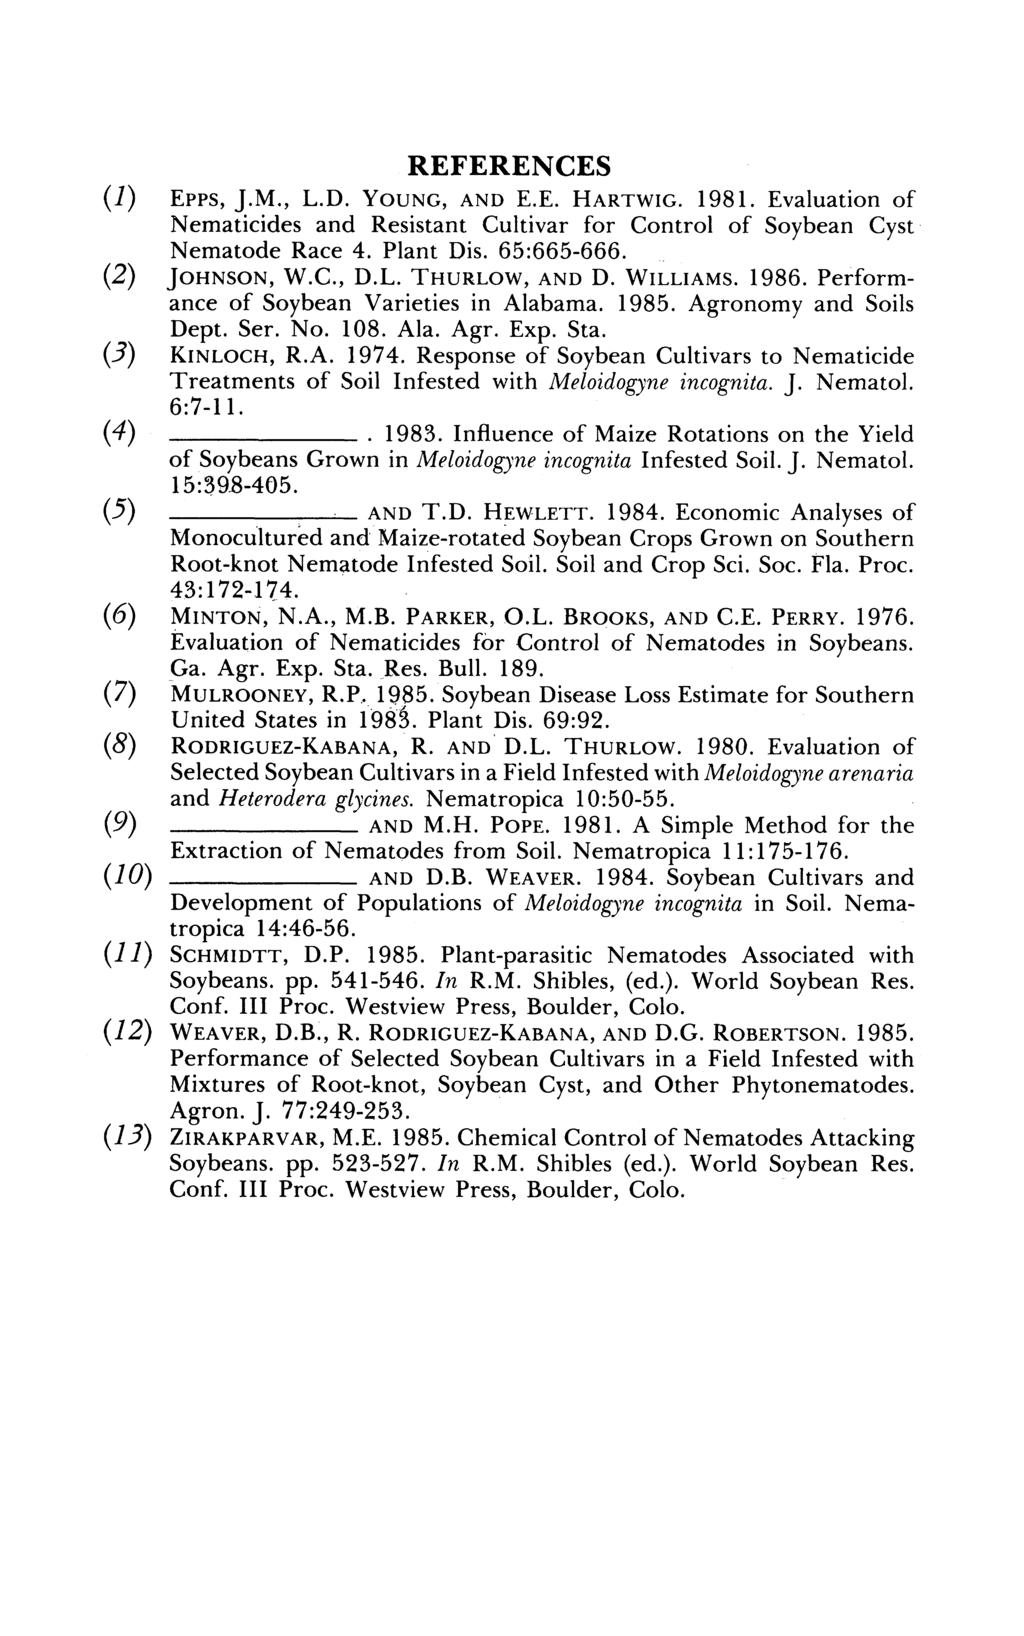 REFERENCES (1) Epps, J.M., L.D. YOUNG, AND E.E. HARTWIG. 1981. Evaluation of Nematicides and Resistant Cultivar for Control of Soybean Cyst (2) Nematode Race 4. Plant Dis. 65:665-666. JOHNSON, W.C., D.